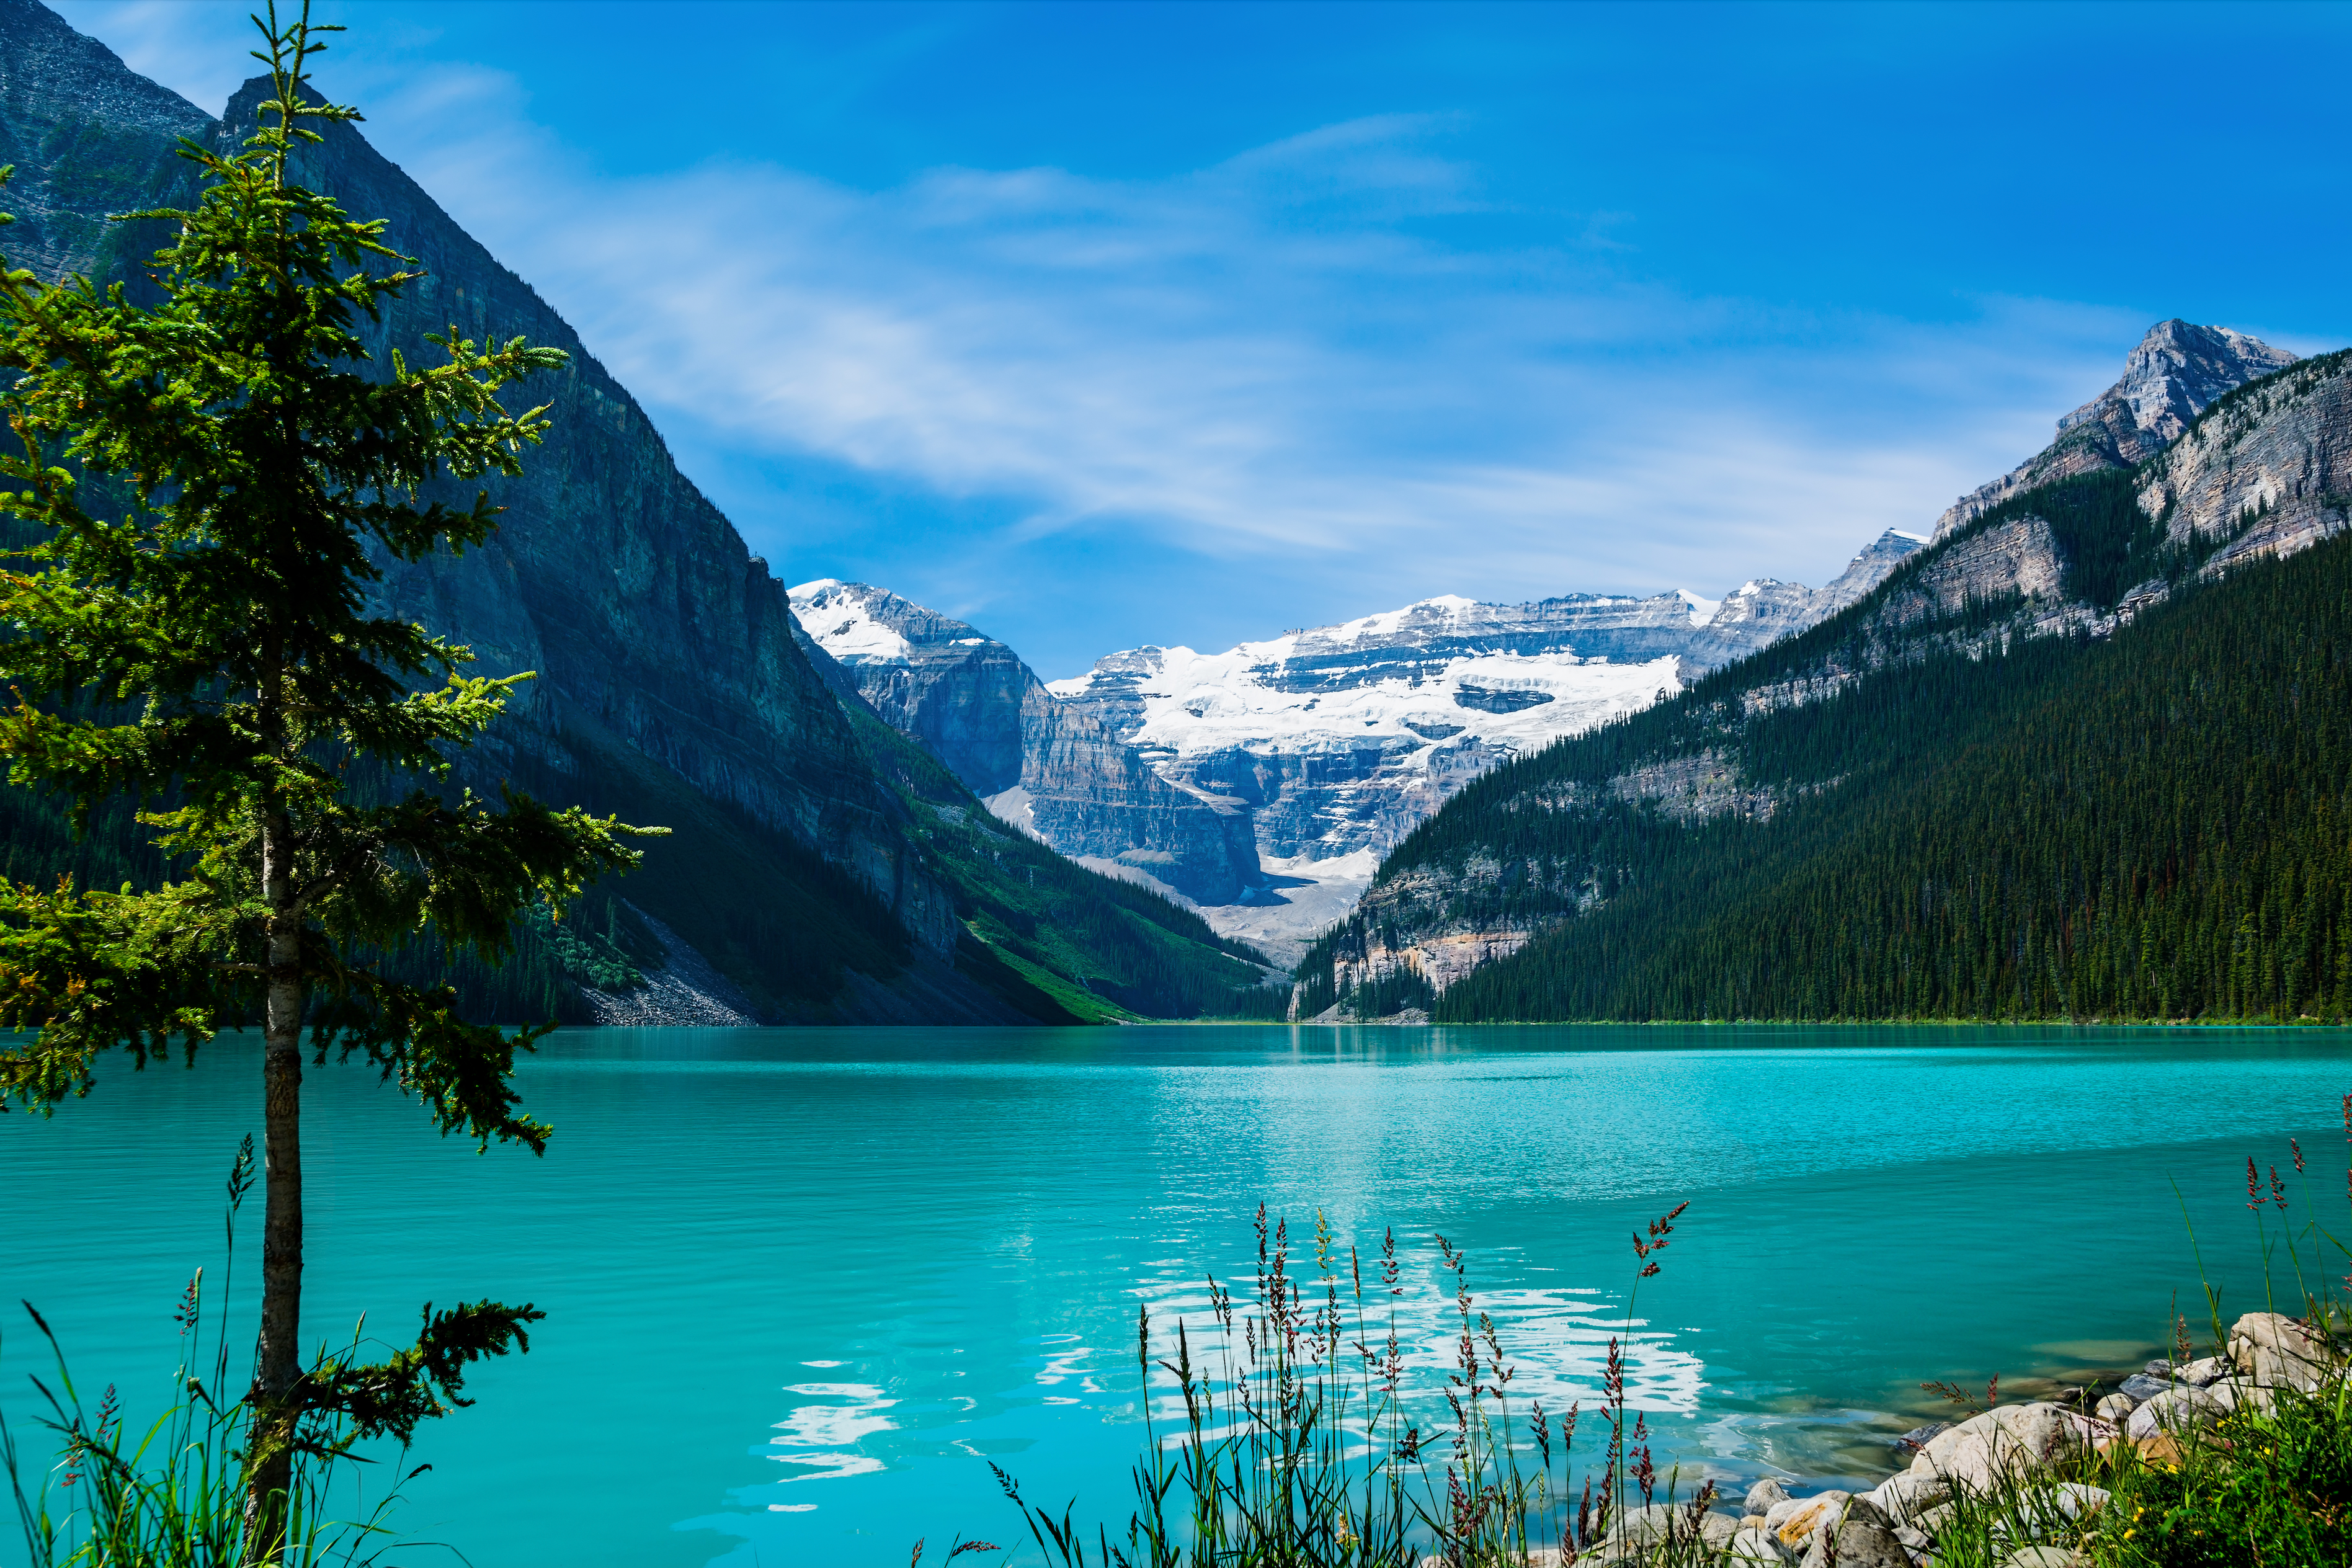 3. Lake Louise - Best for Luxury - Lake Louise in Banff National Park